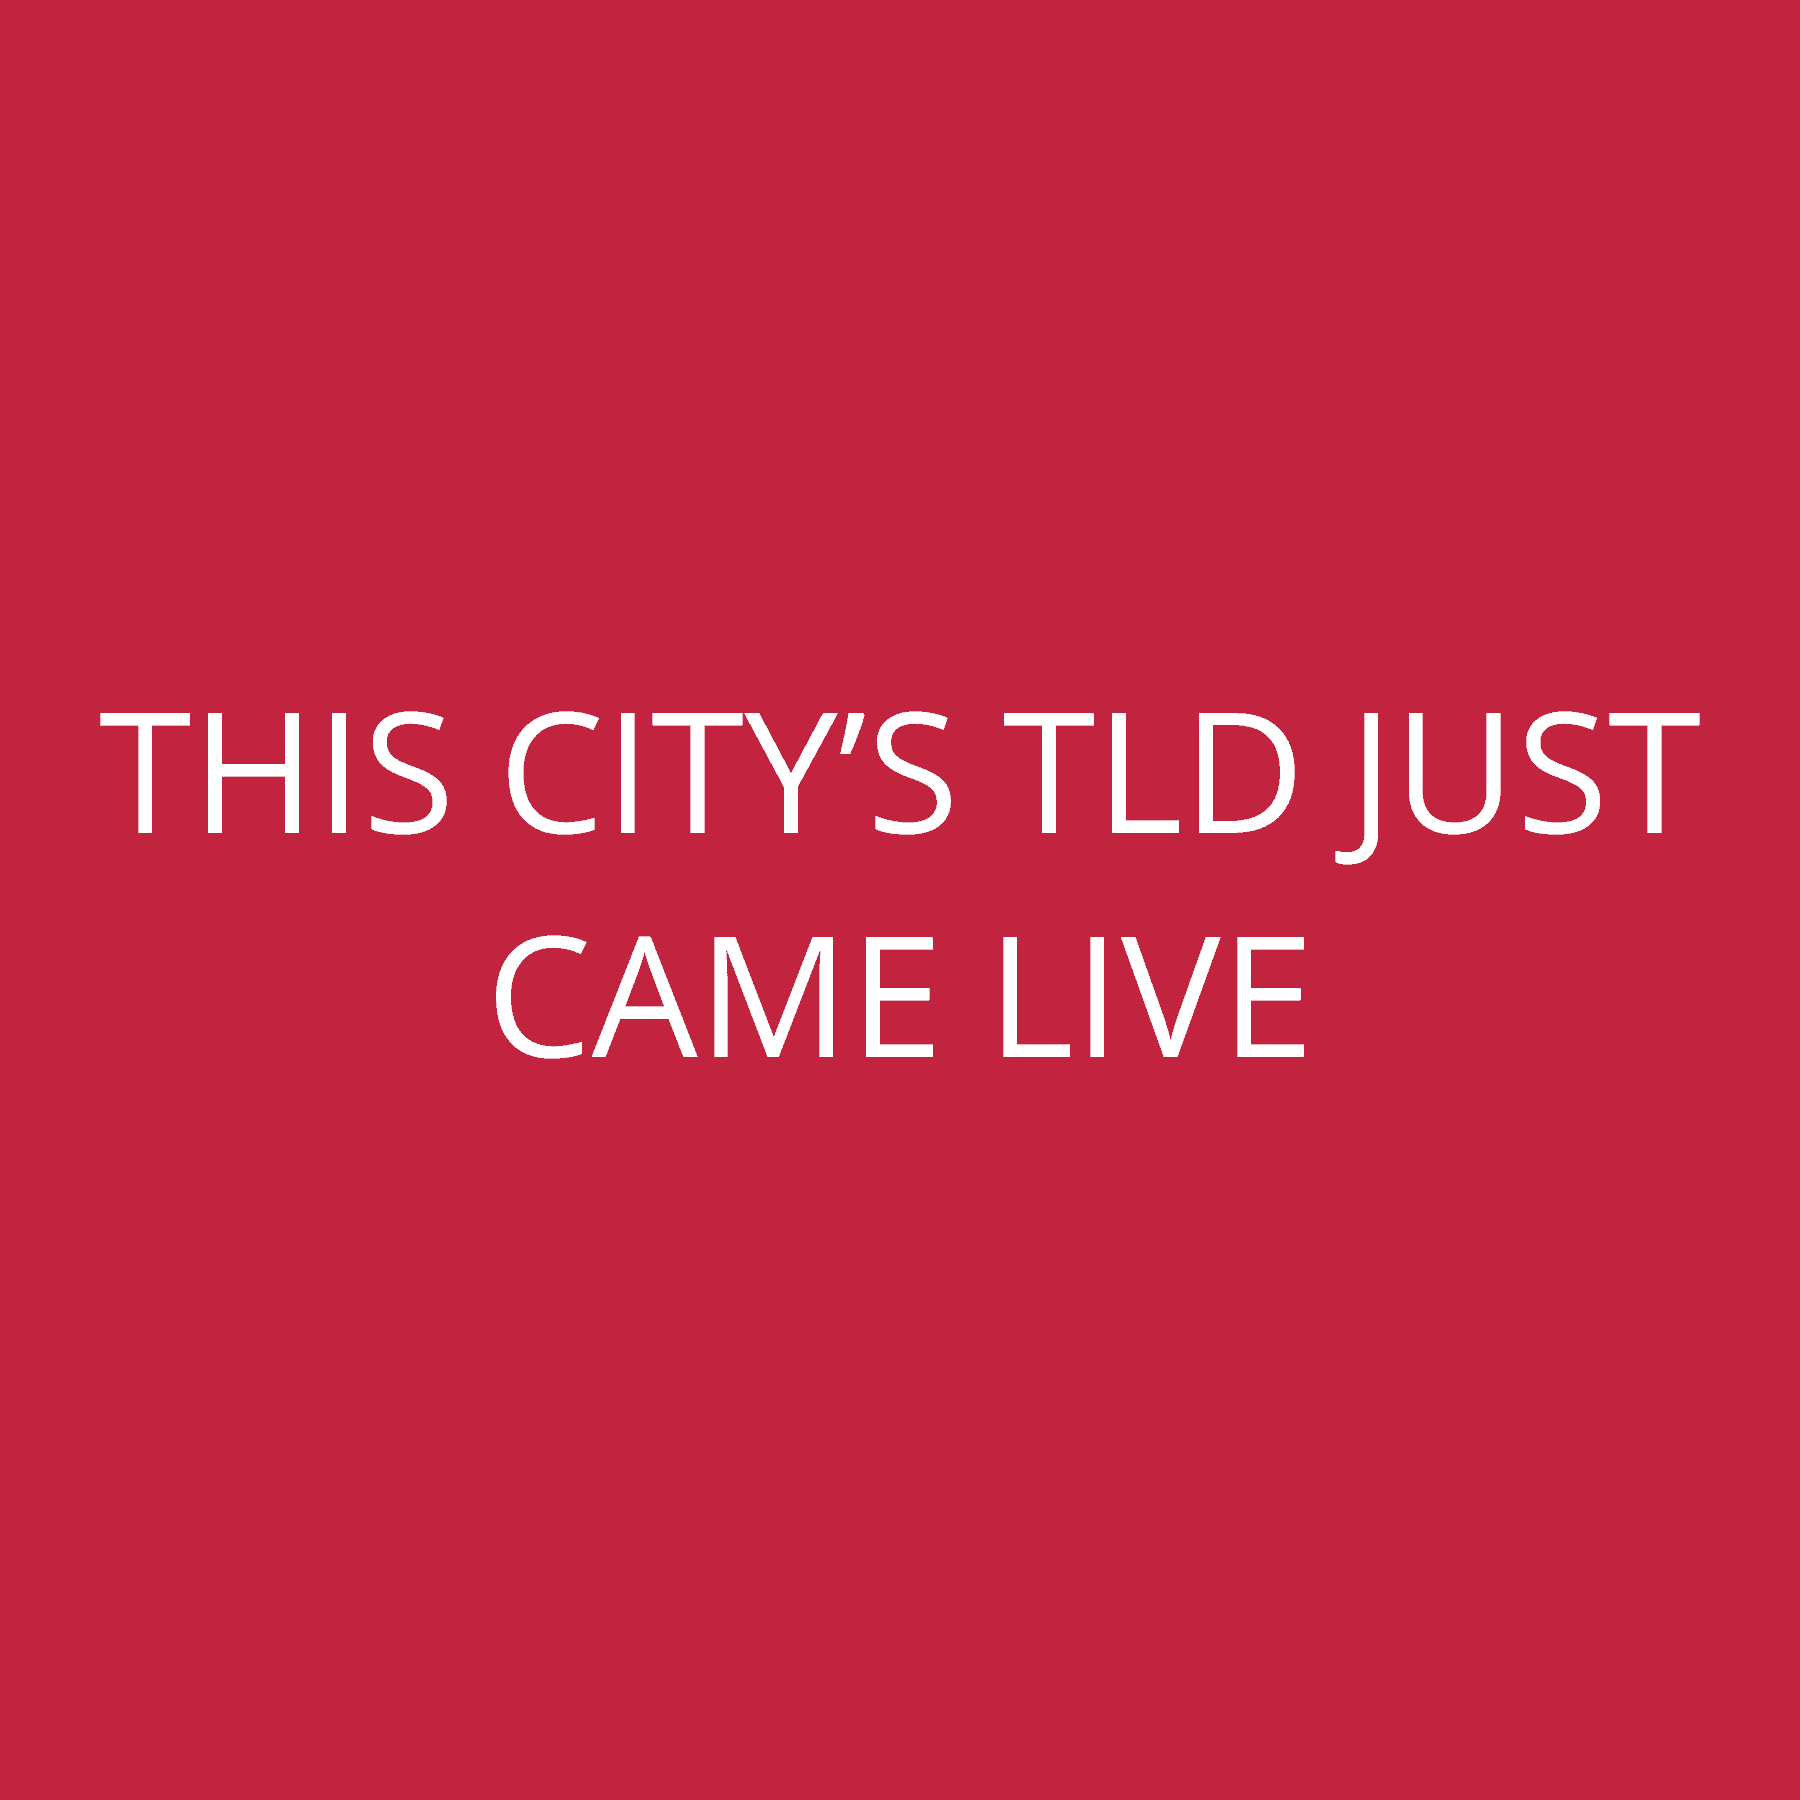 This city’s TLD just came LIVE